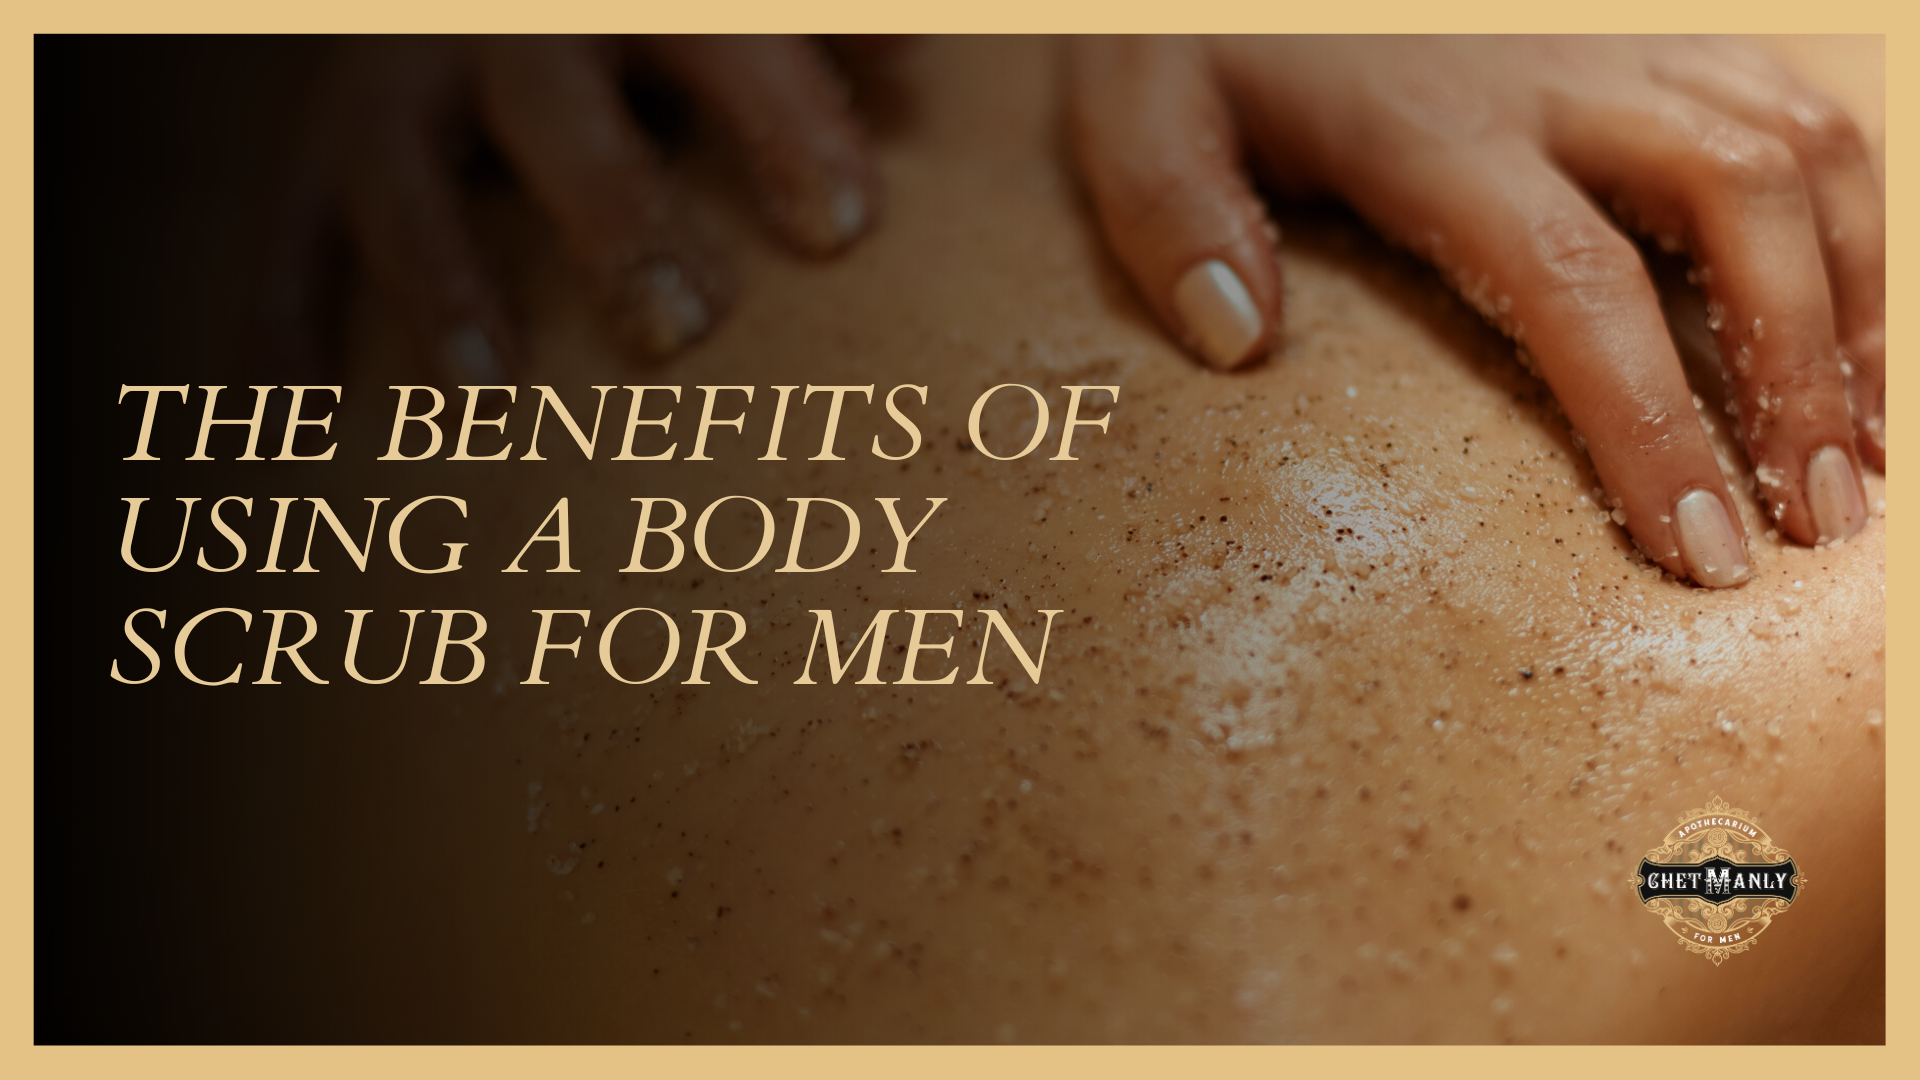 The Benefits of Using a Body Scrub for Men